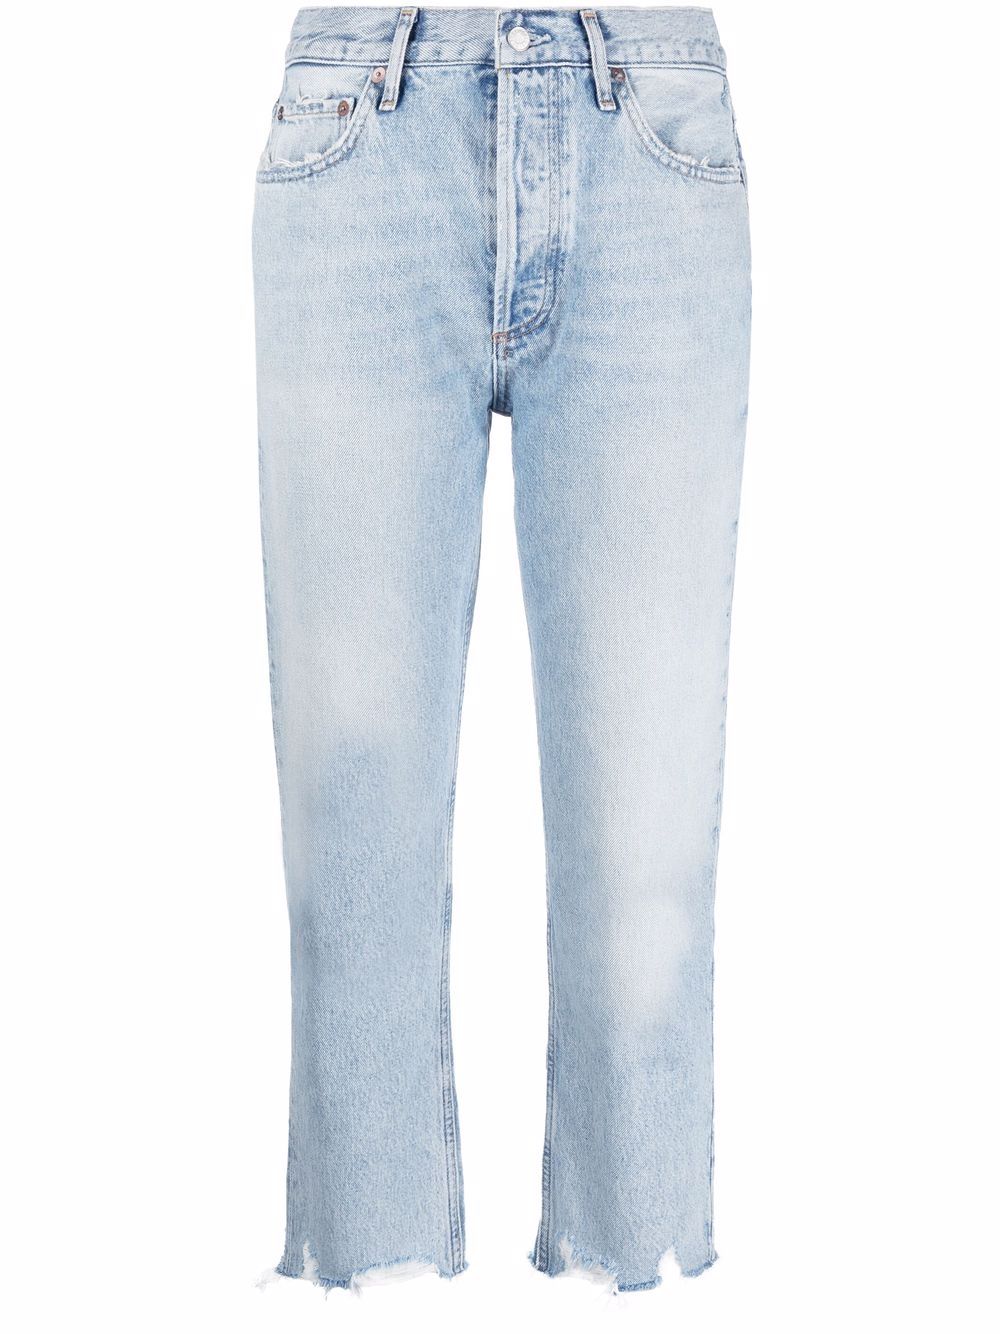 Riley cropped jeans